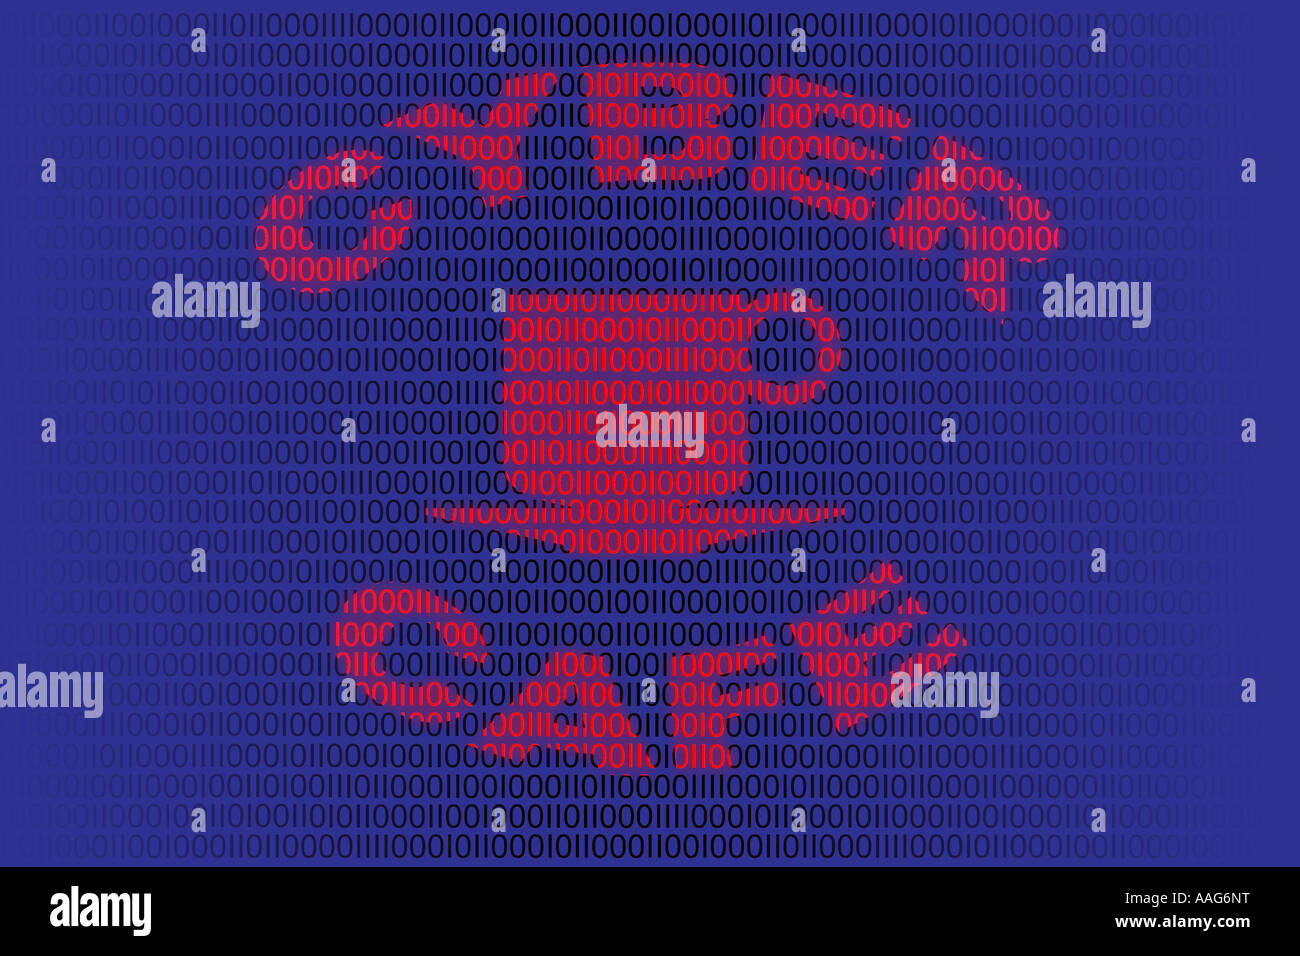 Cyber cafe sign in binary code Stock Photo